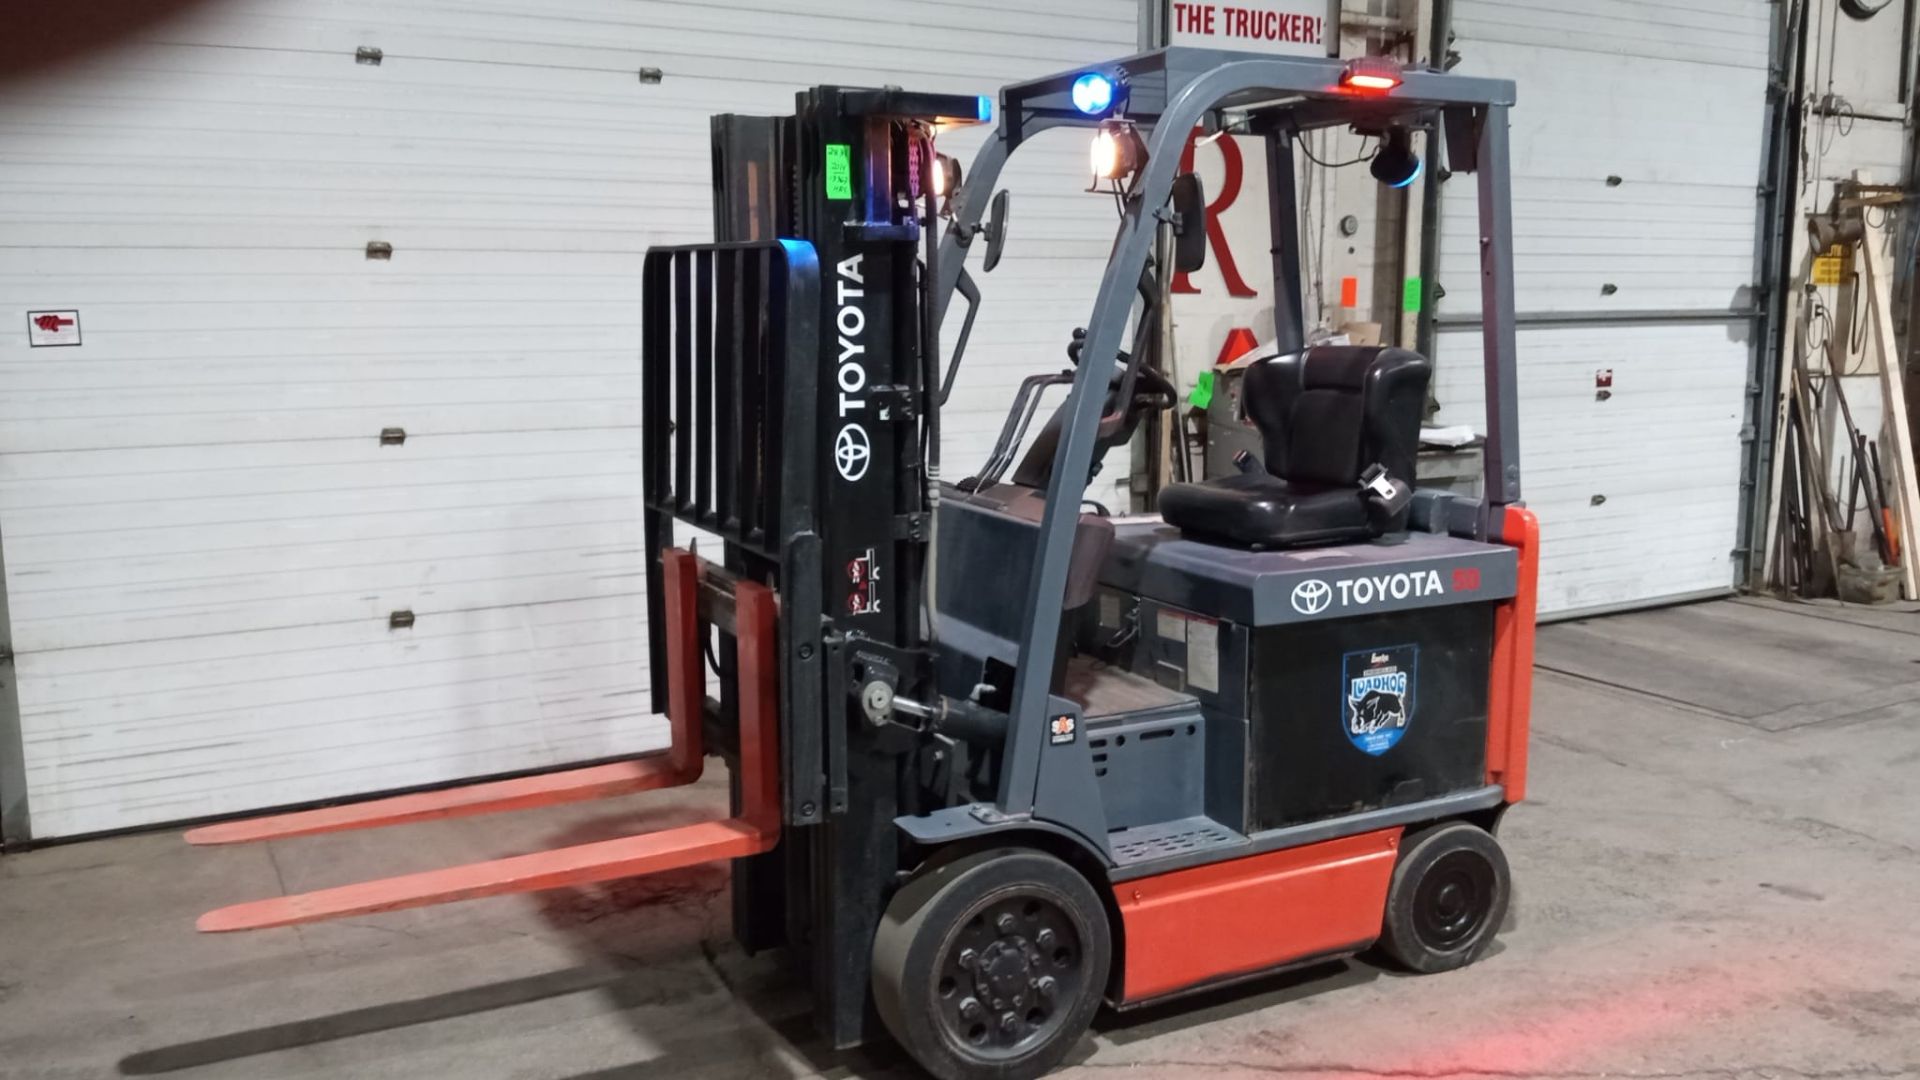 2014 TOYOTA 5,000lbs Capacity Electric Forklift 36V with sideshift & 3-Stage Mast - FREE CUSTOMS - Image 4 of 6